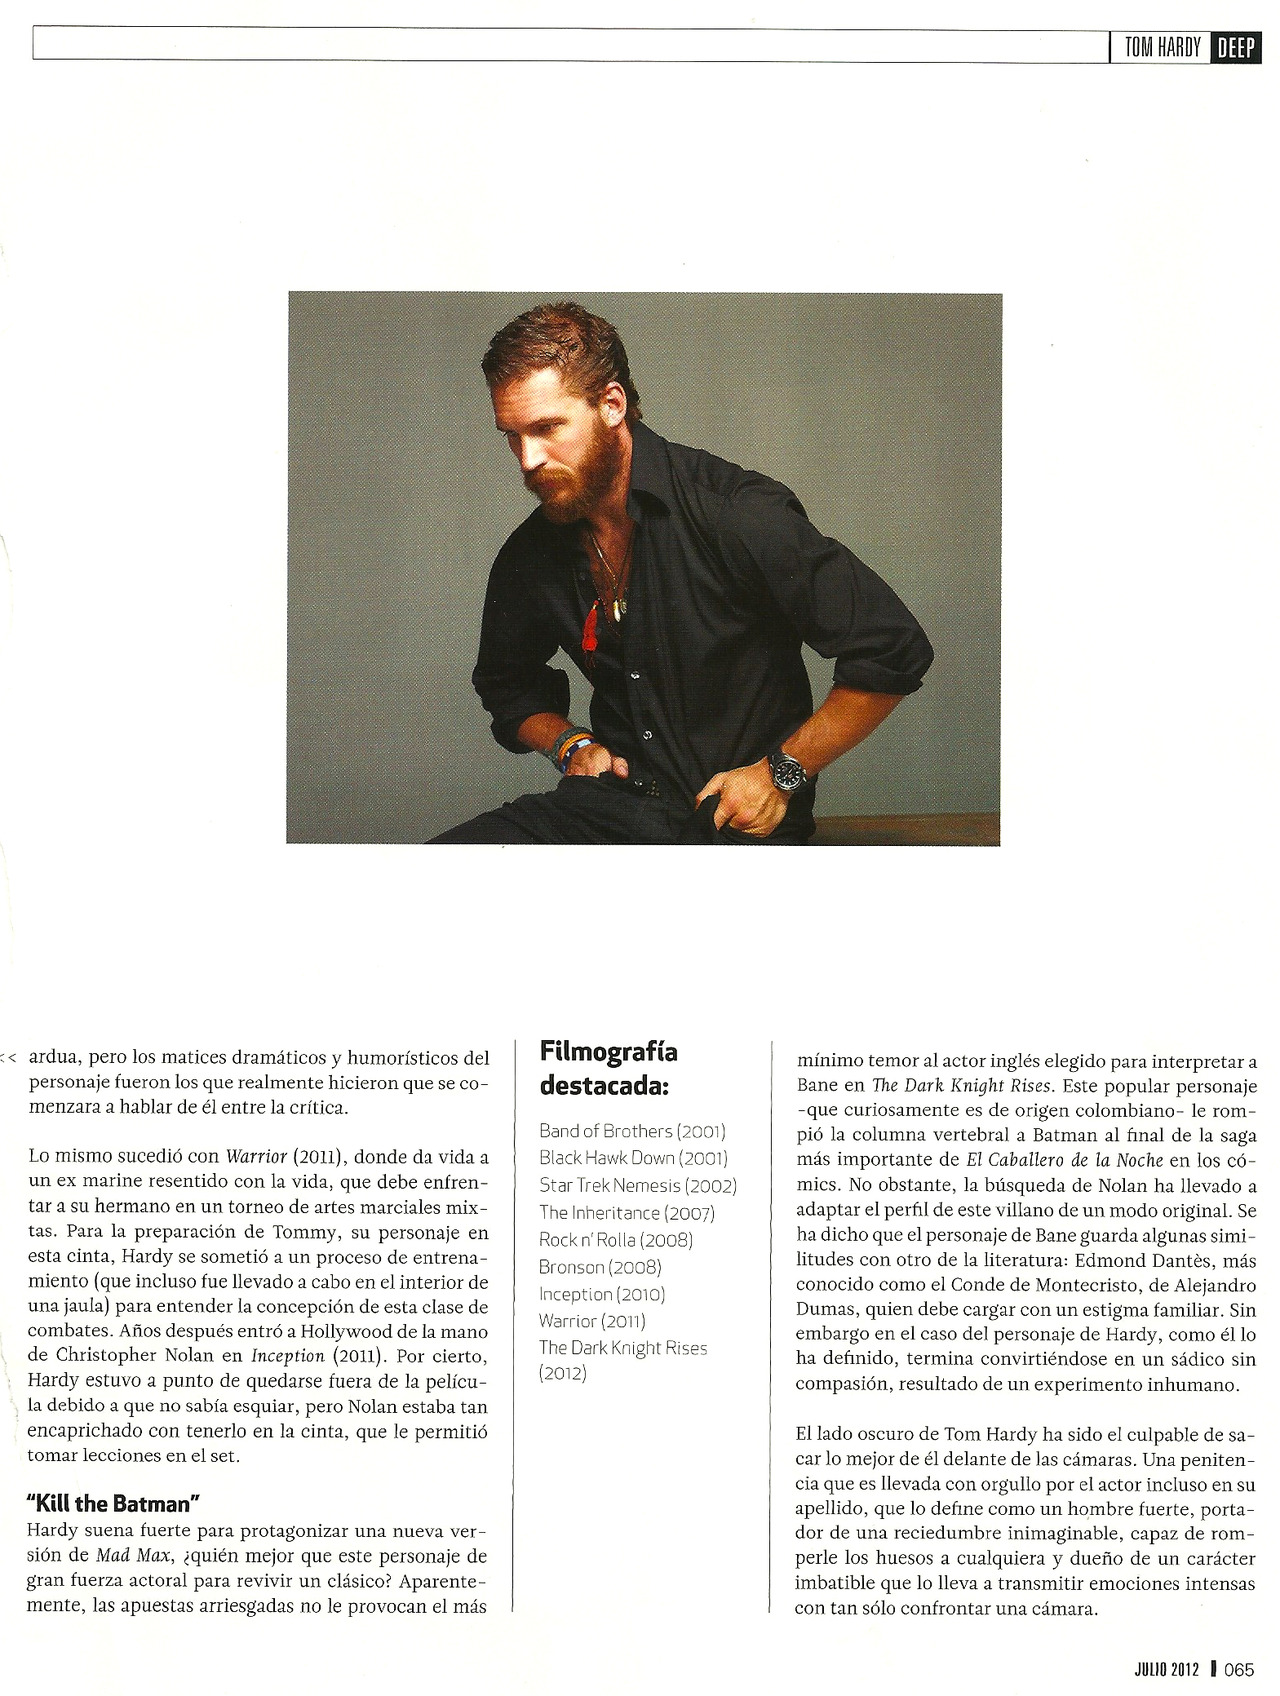 charlidos:  The article about Tom Hardy in Deep Magazine, translated and scanned